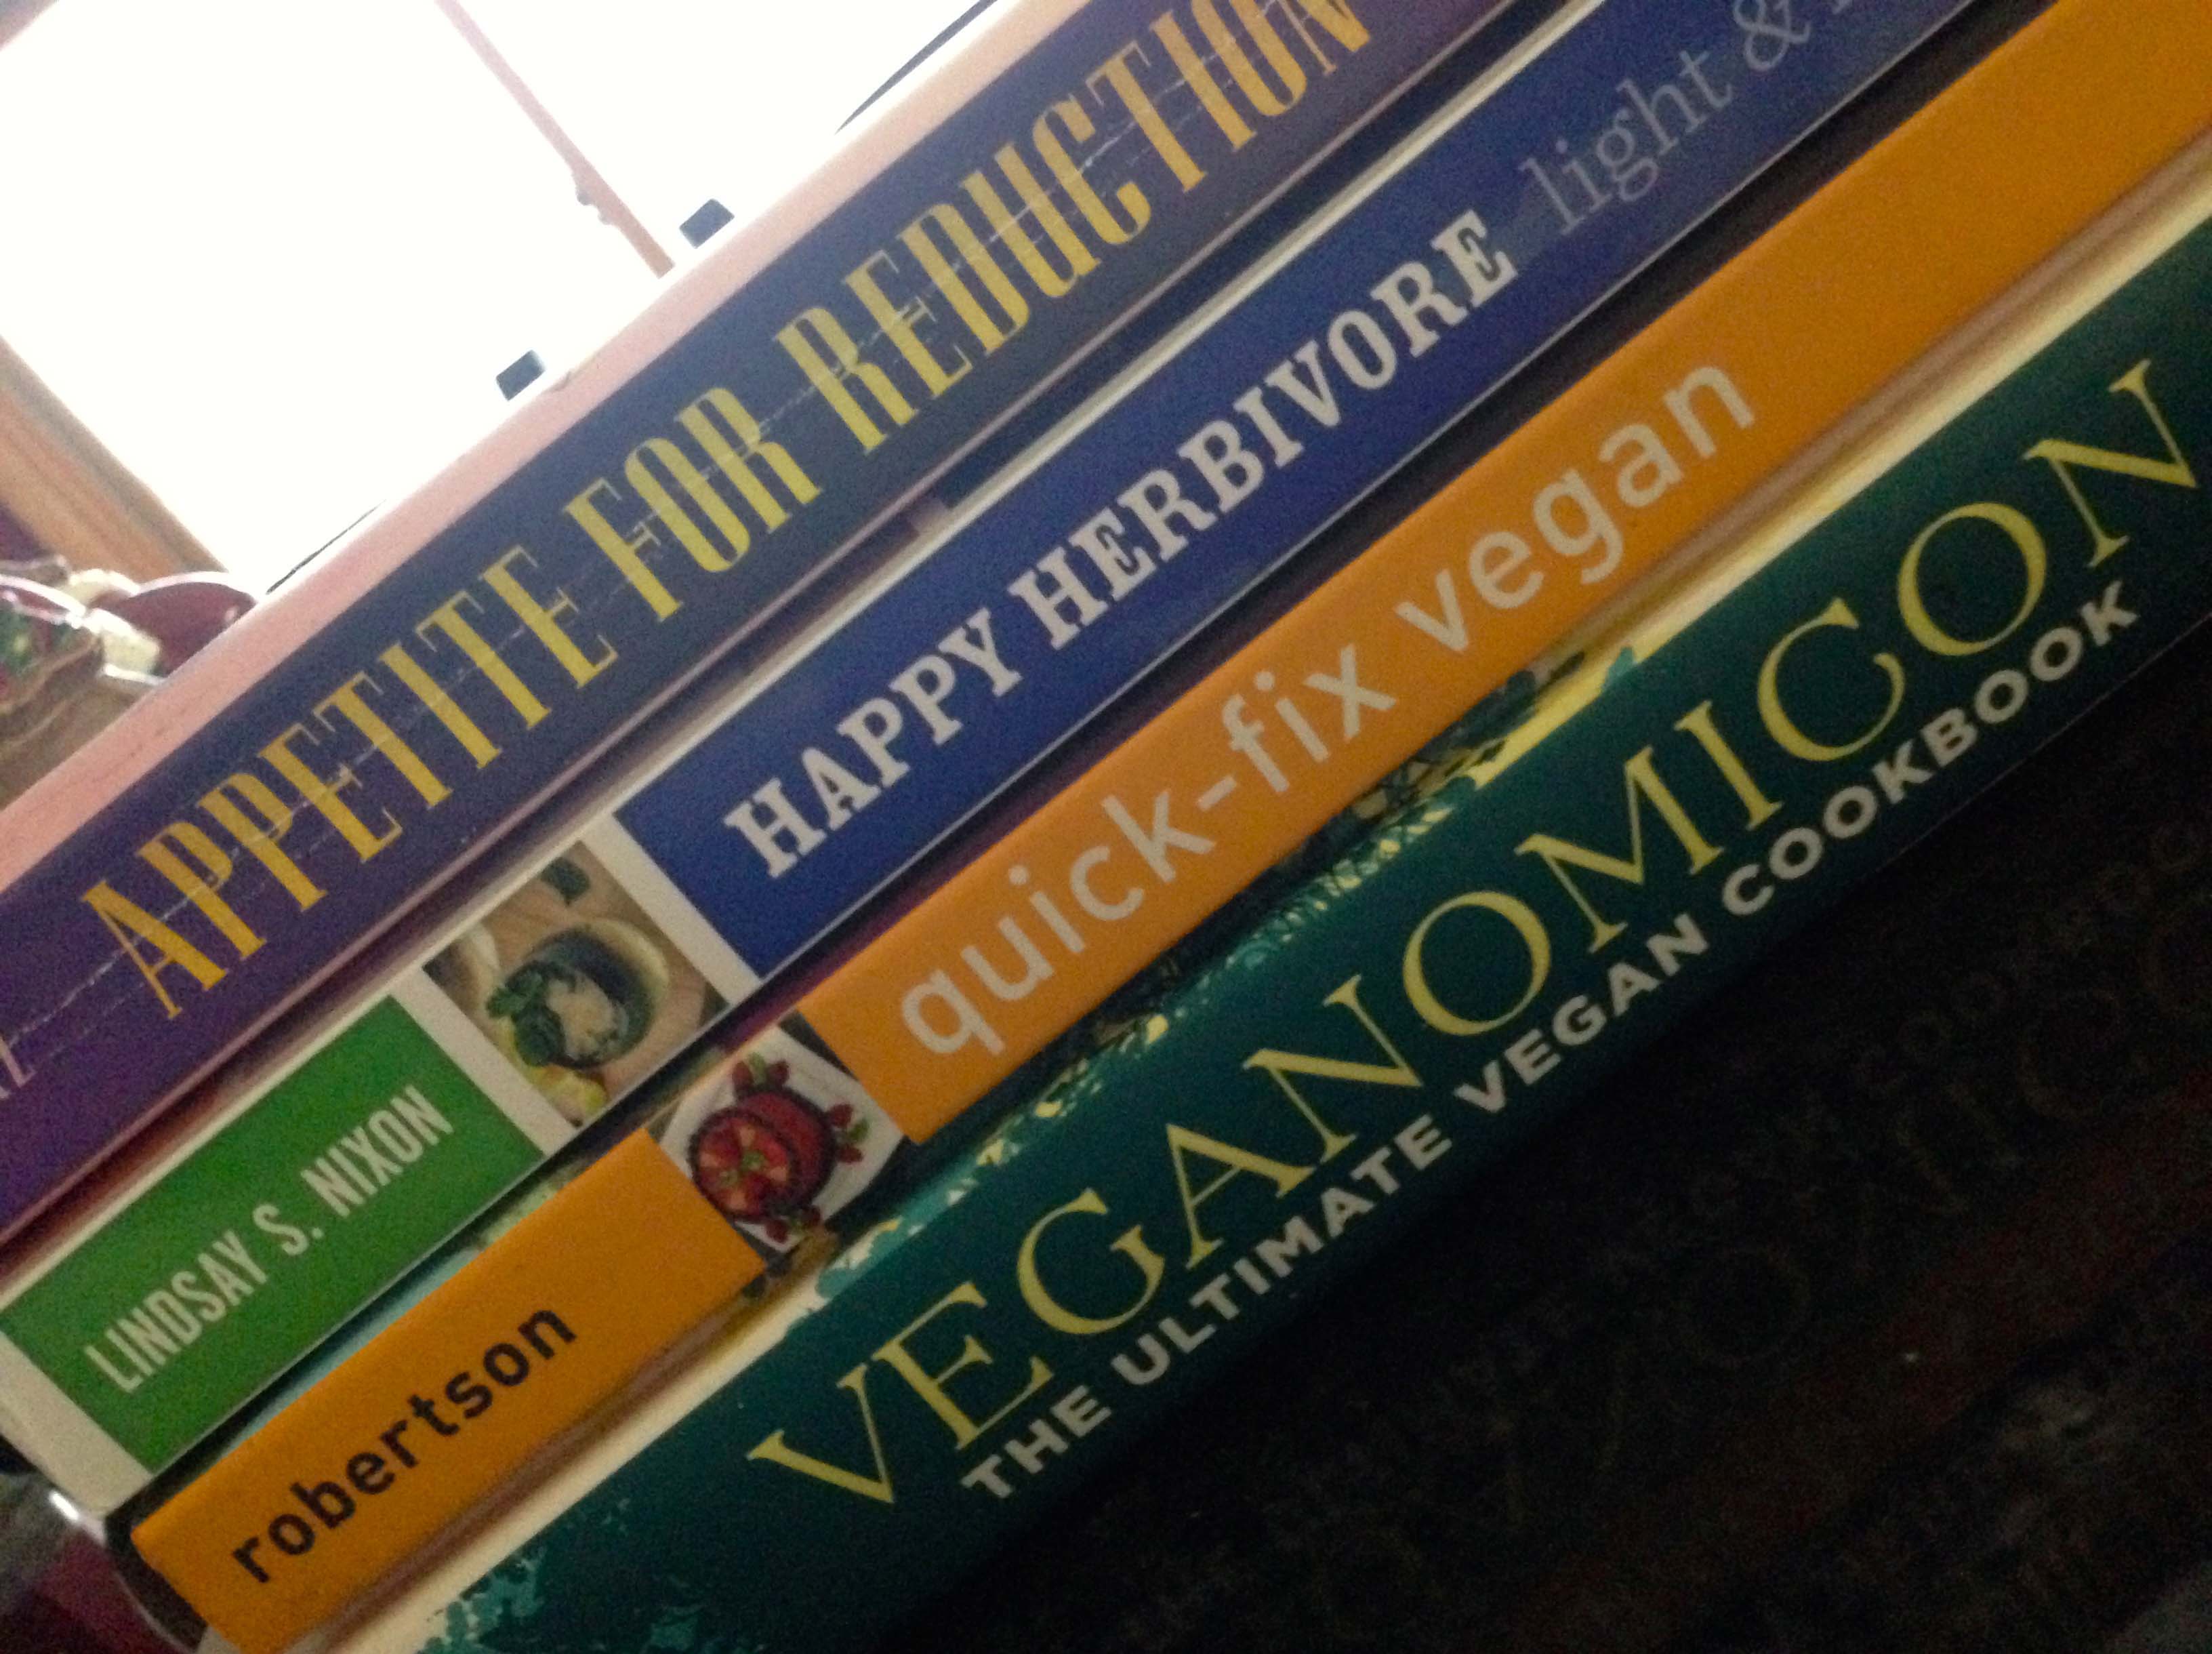 Vegan Cookbook and Blog Recommendations for 2014